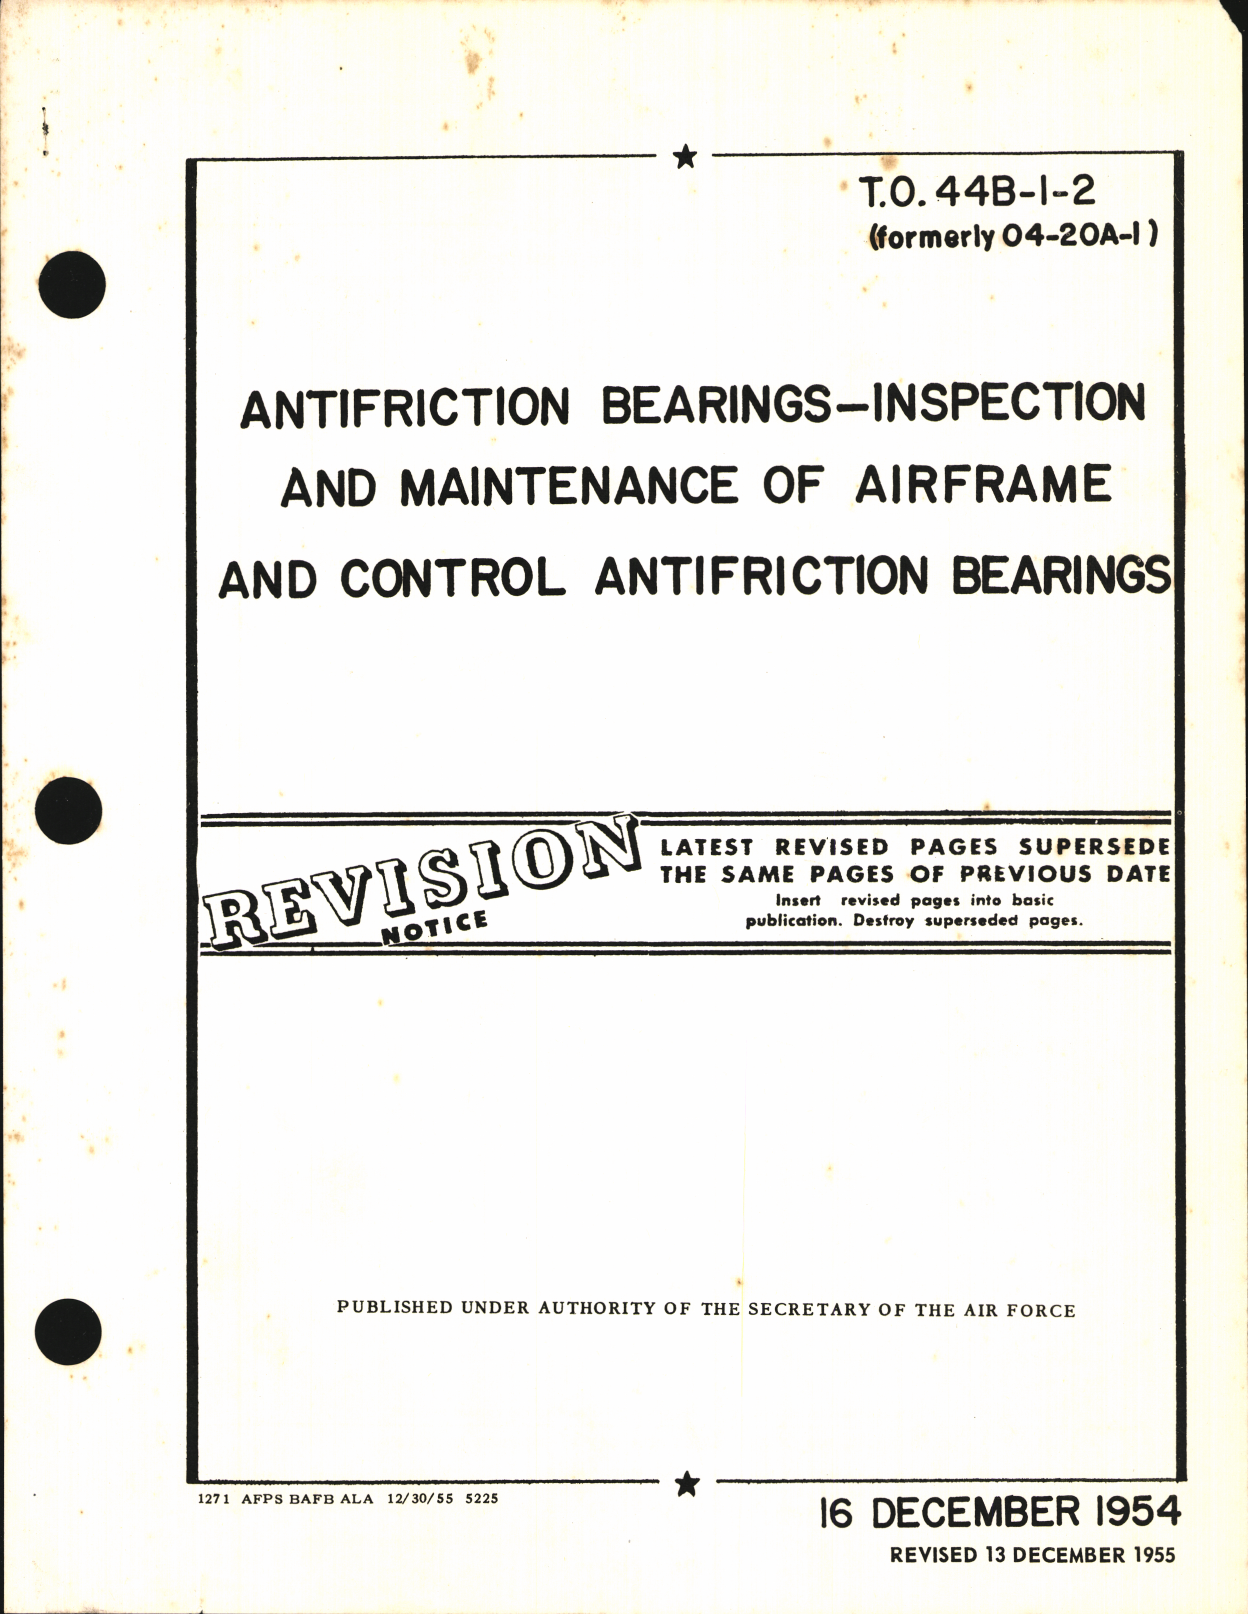 Sample page 1 from AirCorps Library document: Inspection and Maintenance of Airframe and Control Anti-friction Bearings